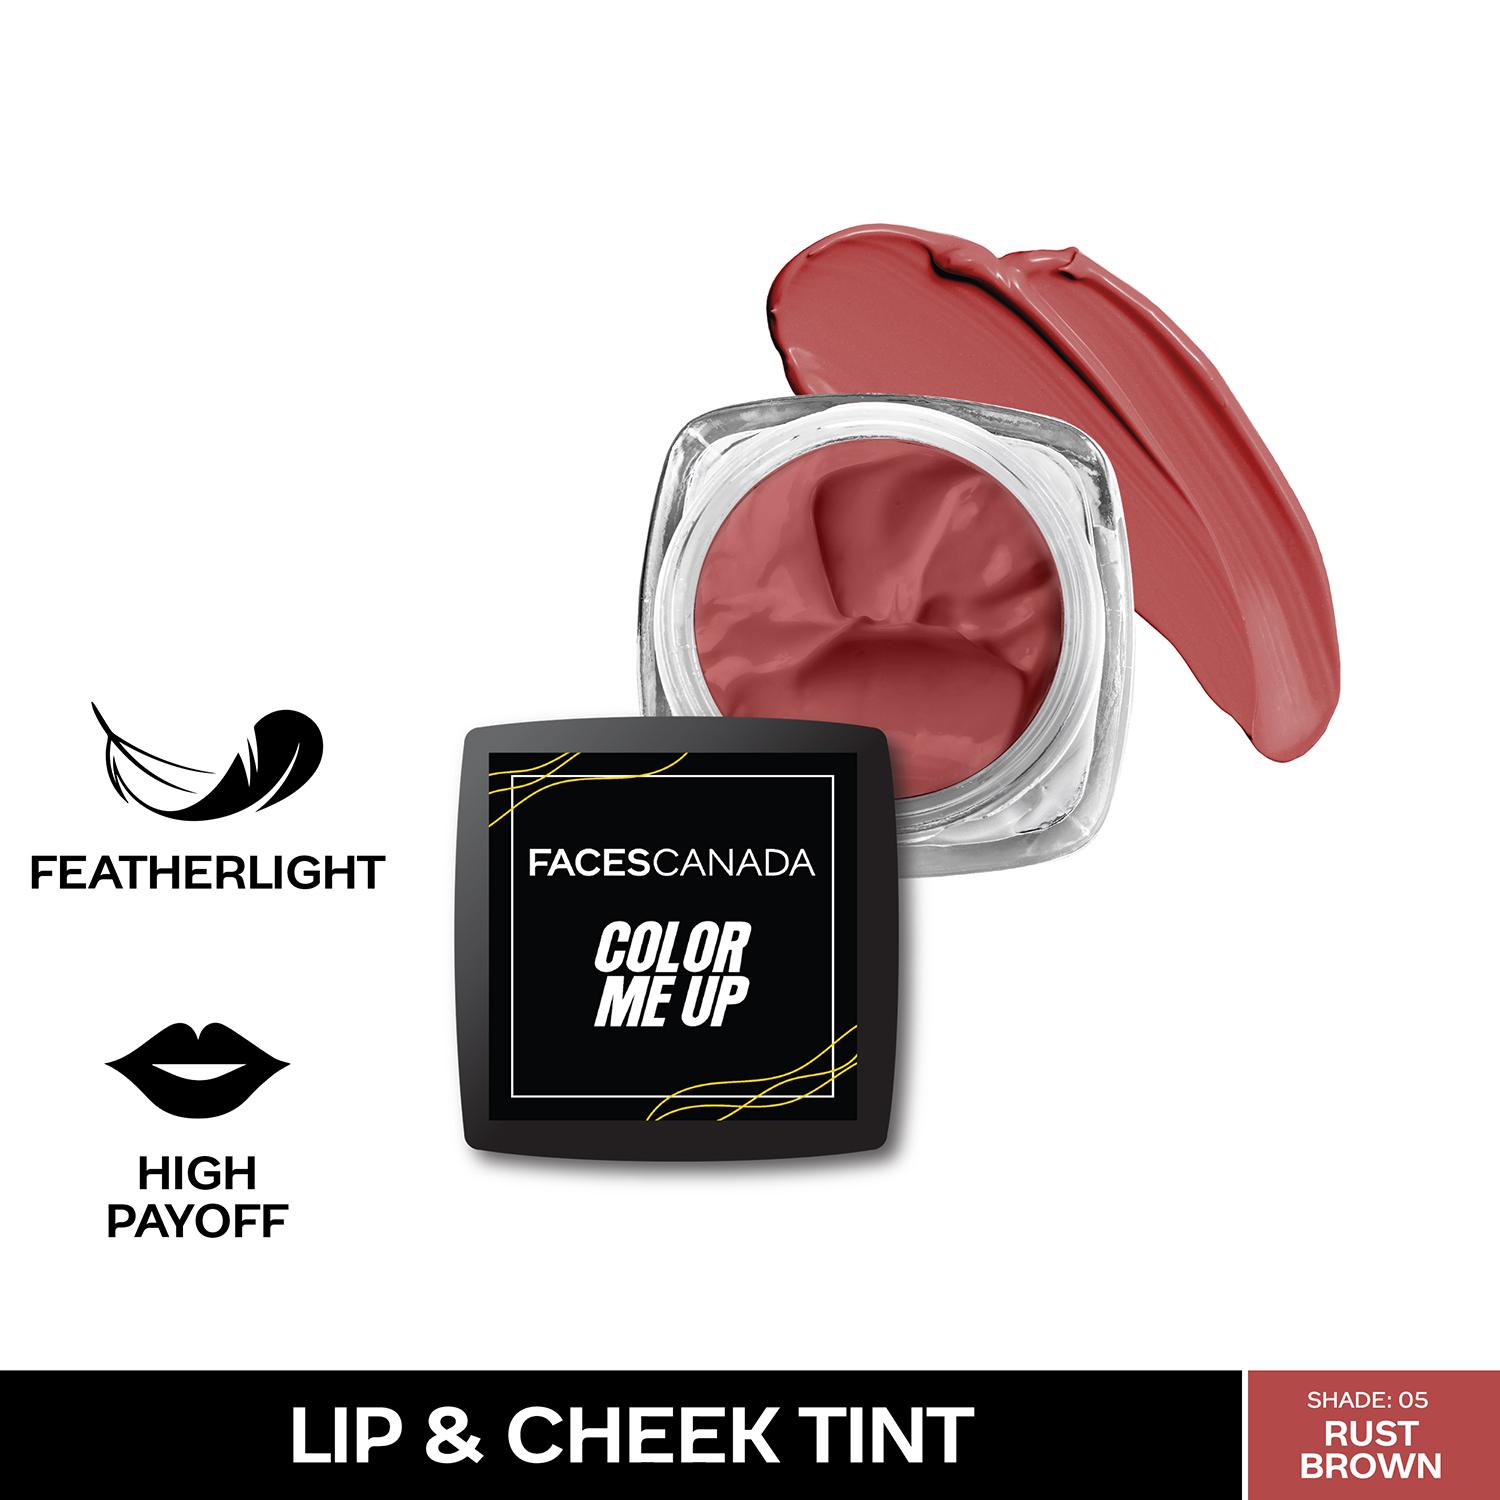 Faces Canada | Faces Canada Color Me Up Lip & Cheek Tint - Rust Brown 05, Feather-Light, High Payoff (3 g)